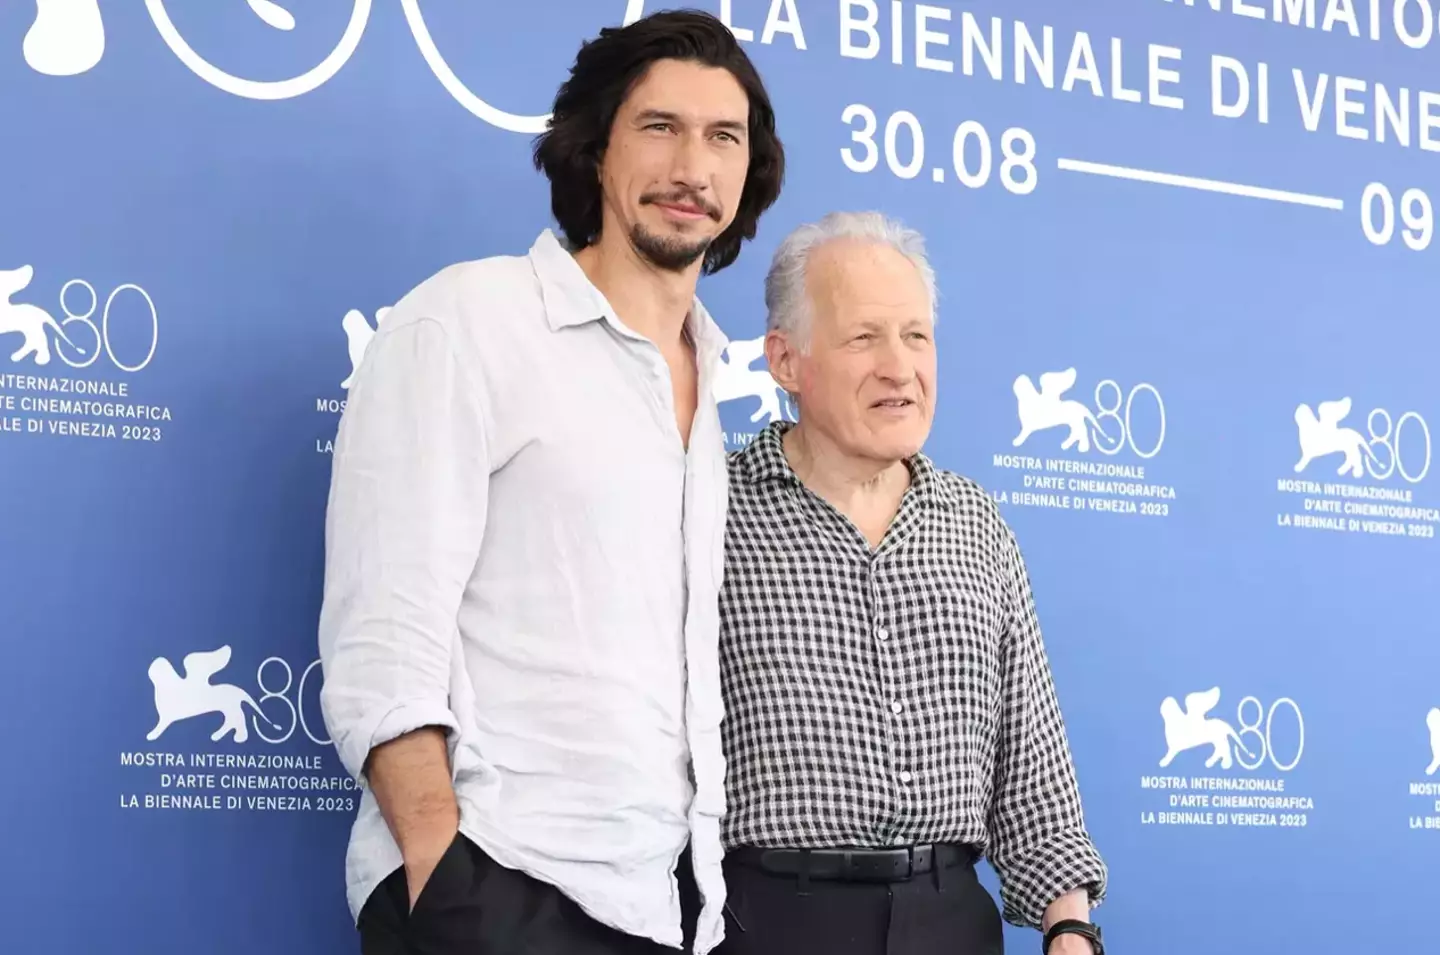 Adam Driver and director Michael Mann attend a photocall for the movie 'Ferrari'.